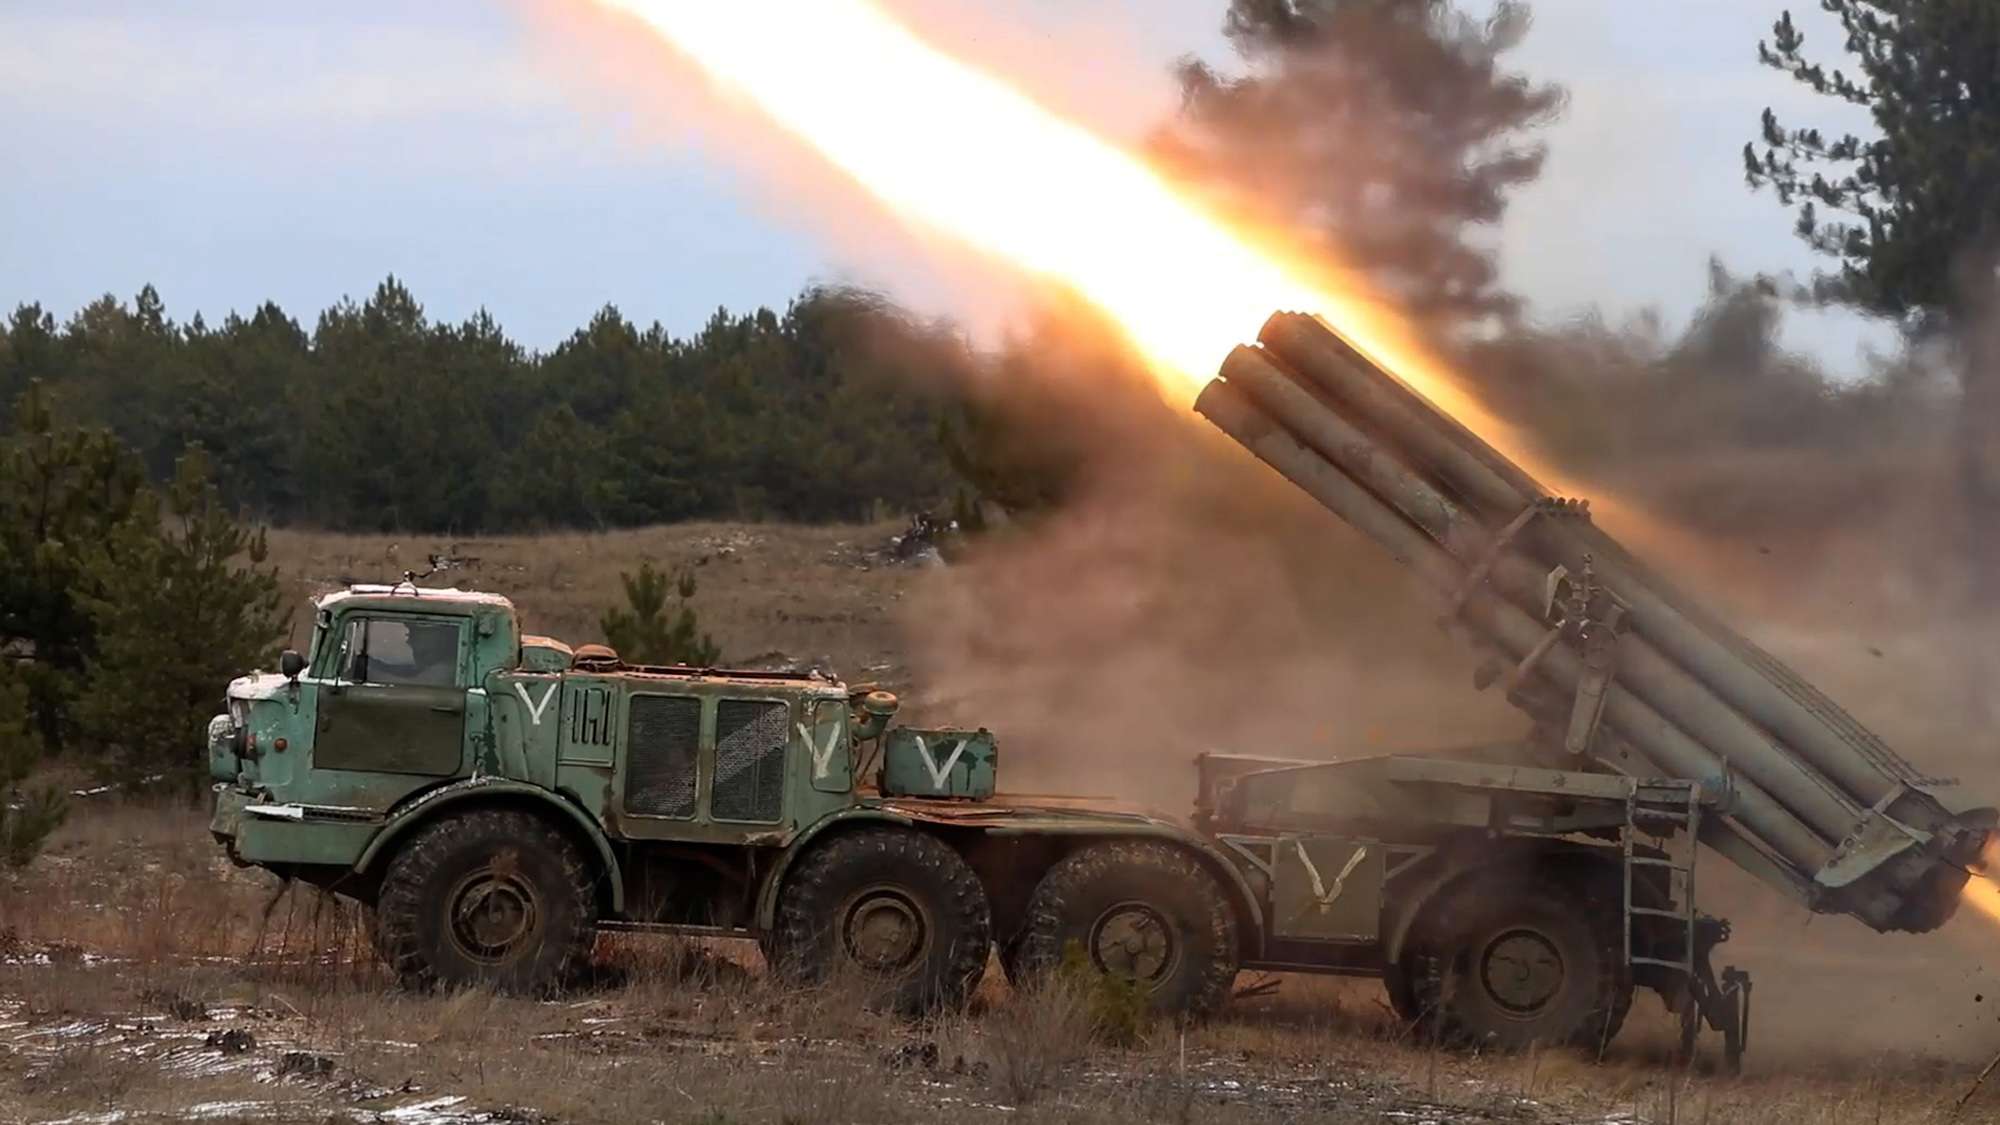 Read more about the article Russia Says It Hit Ukrainian Positions With Uragan And Grad Multiple Launch Rocket Systems